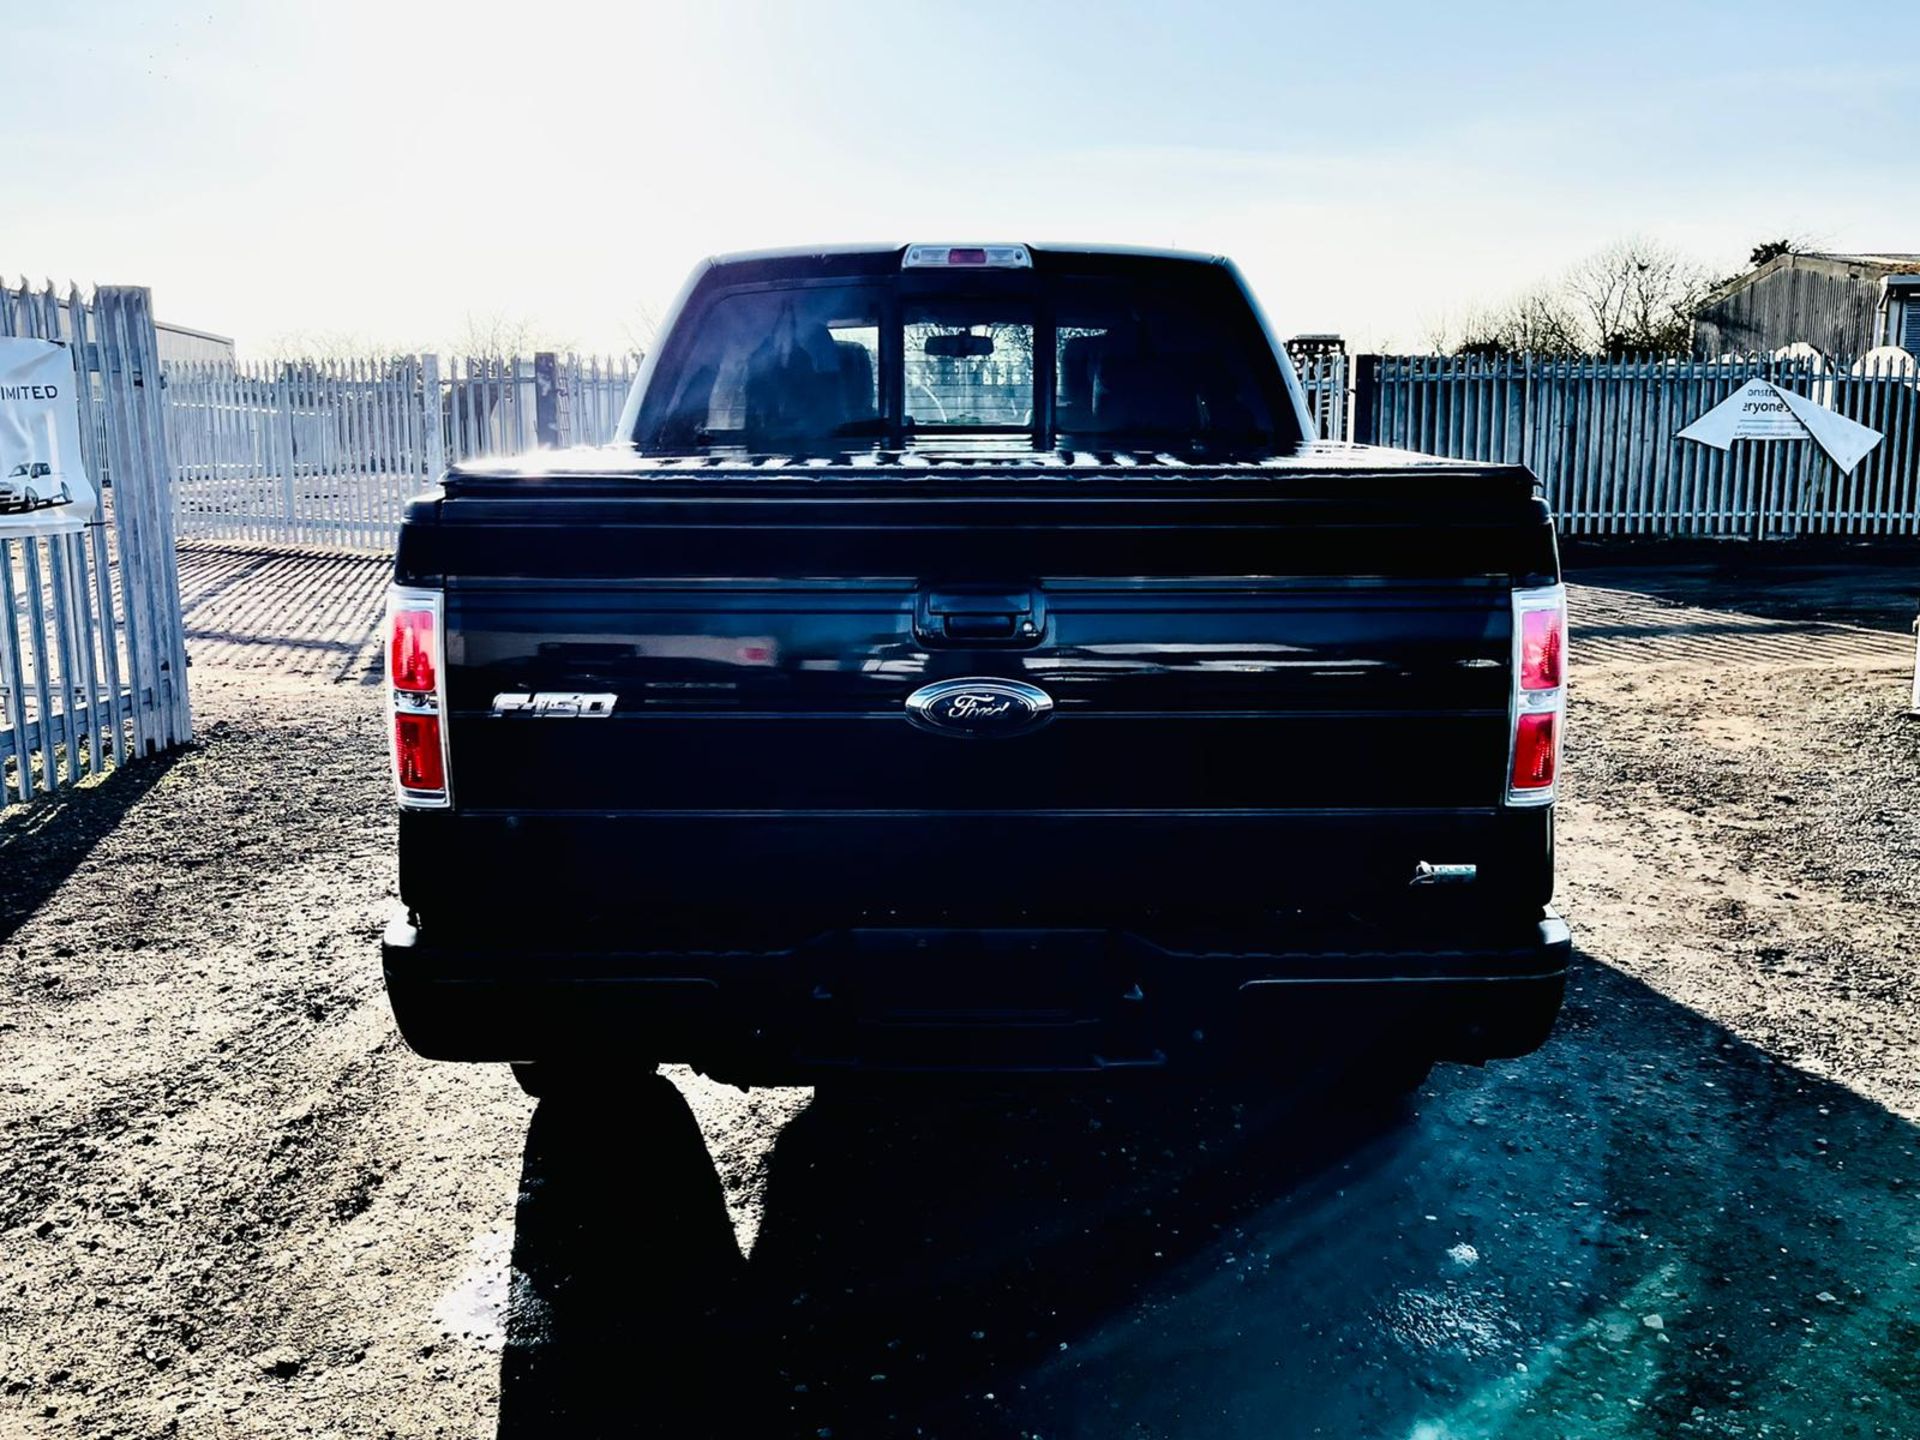 Ford F-150 5.4L V8 SuperCab 4WD FX4 Edition '2010 Year' Colour Coded Package - Top Spec - Image 15 of 44